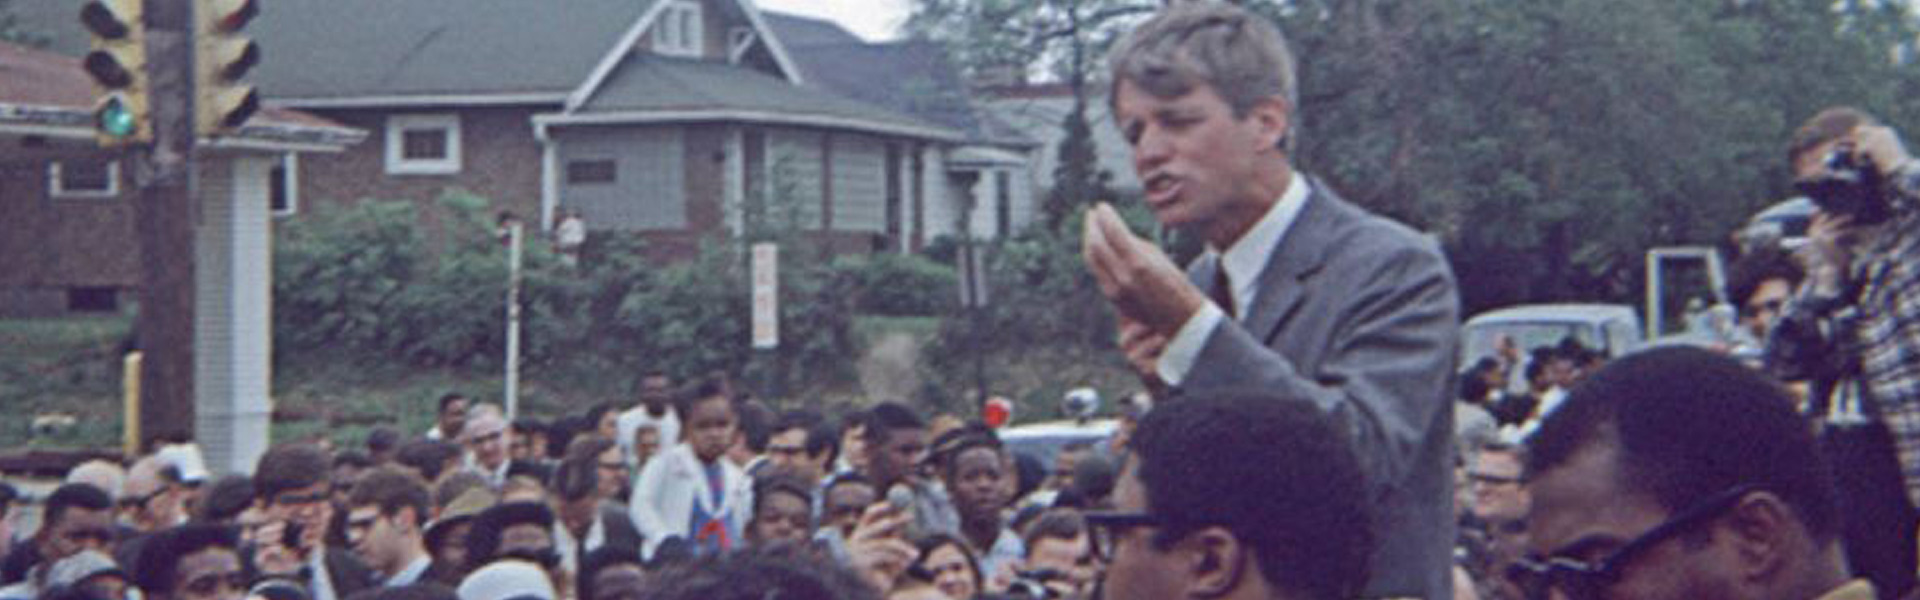 Robert Kennedy in Indianapolis in 1968